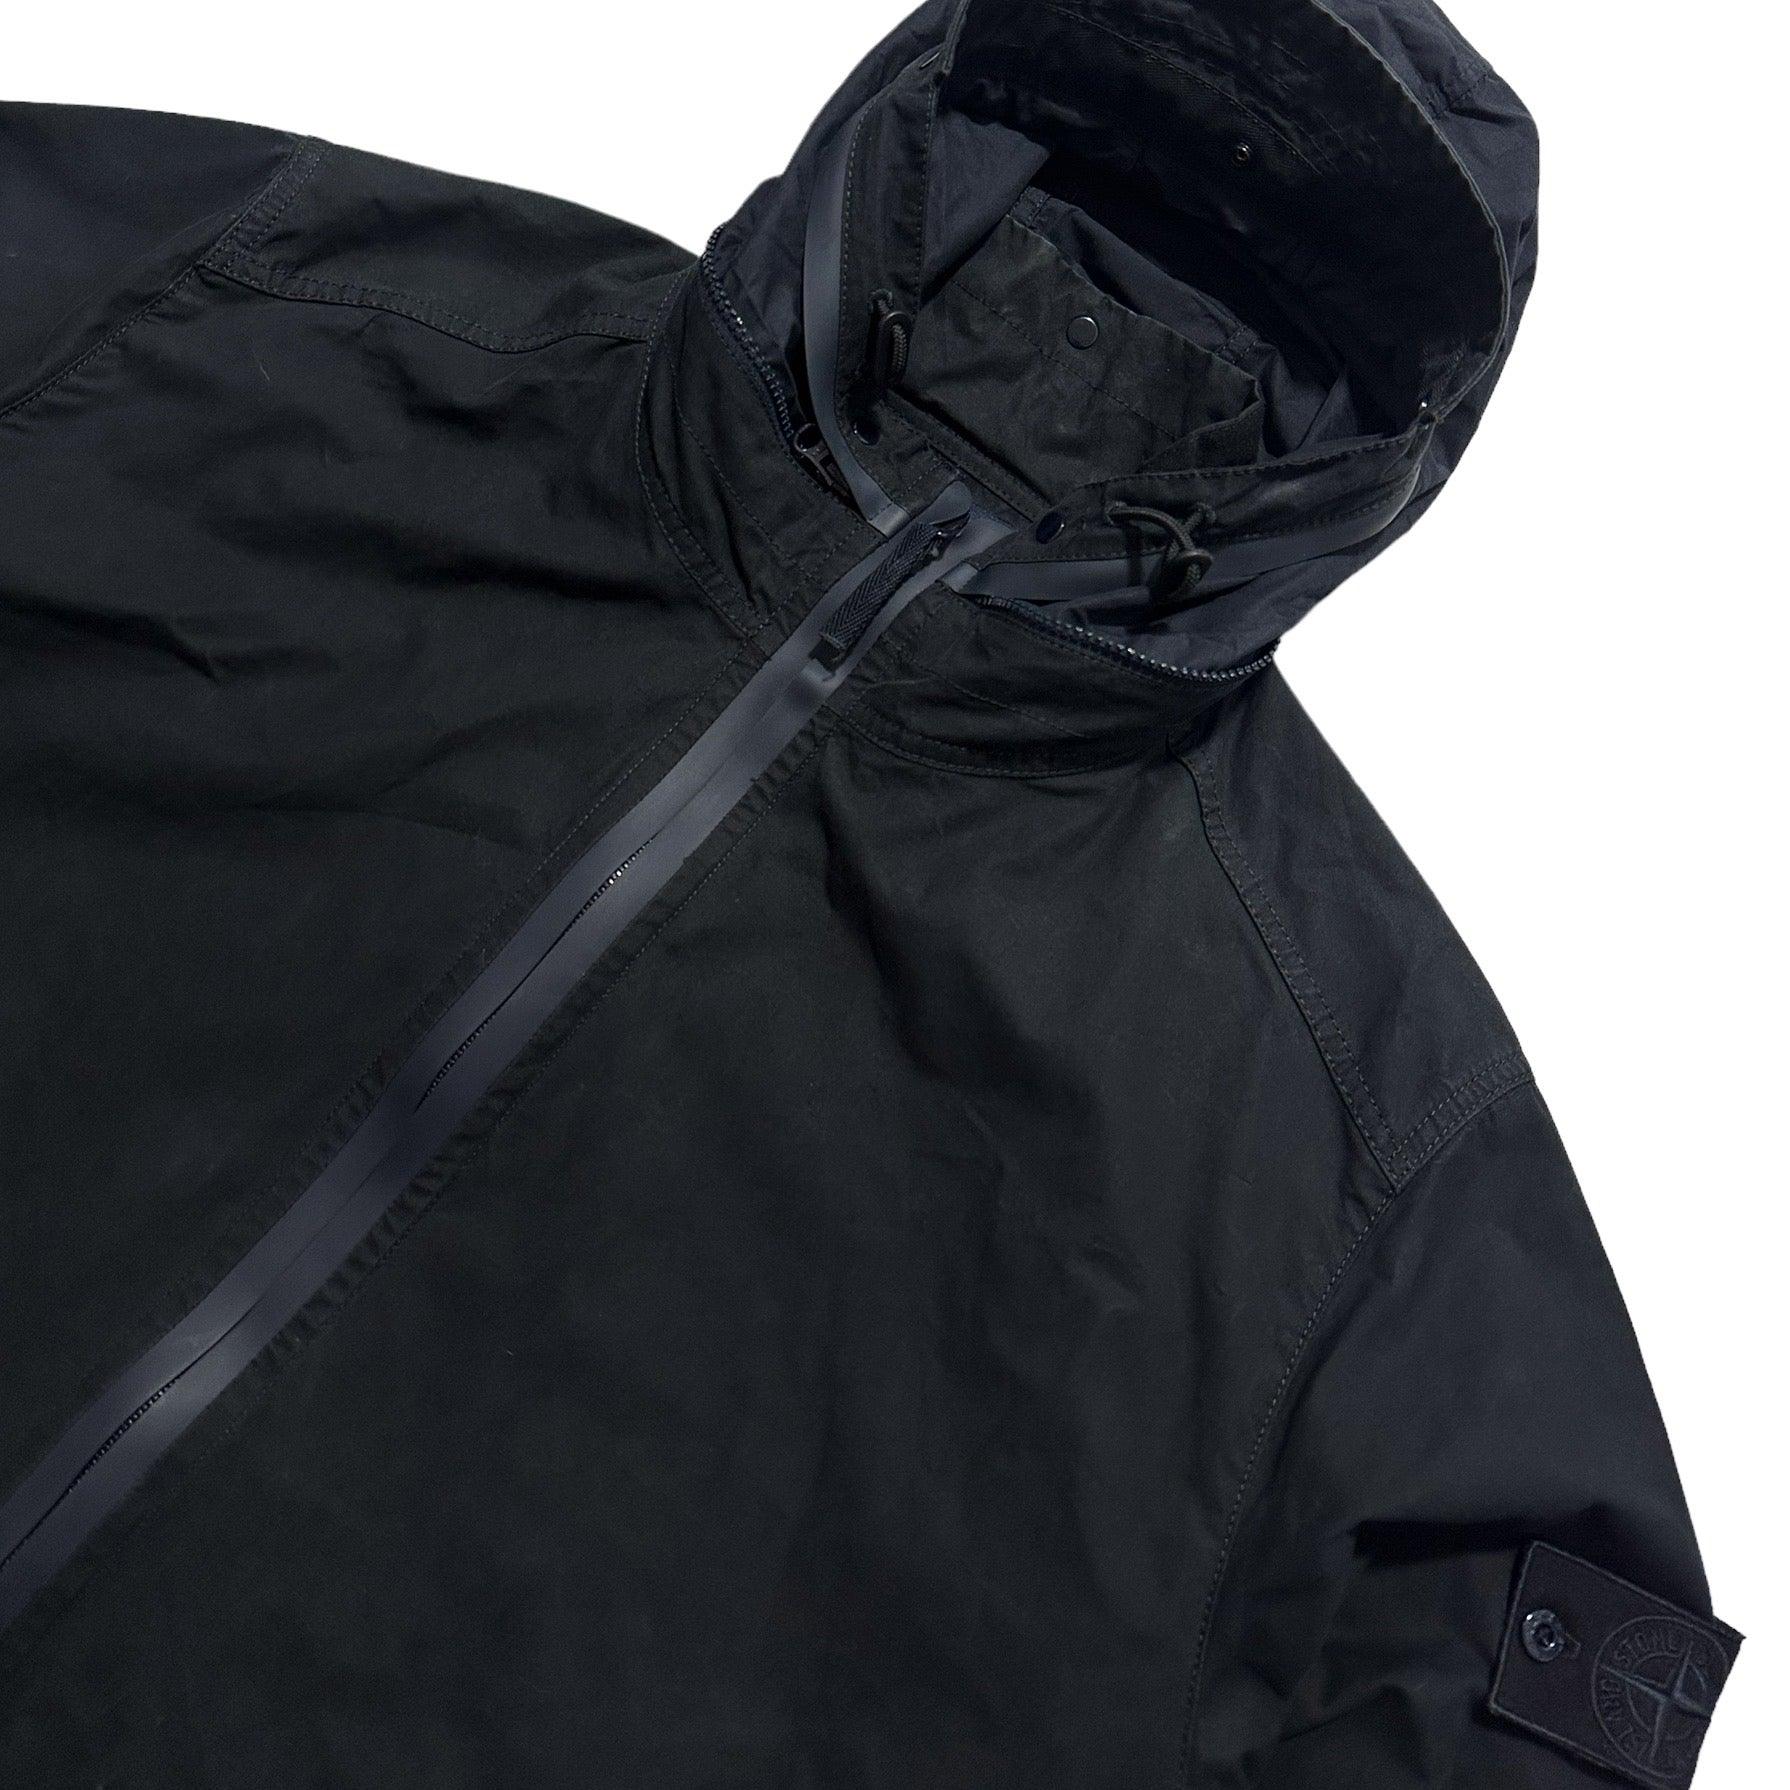 Stone Island Weatherproof Cotton Ghost Piece Parka Jacket with Packable Hood - Known Source